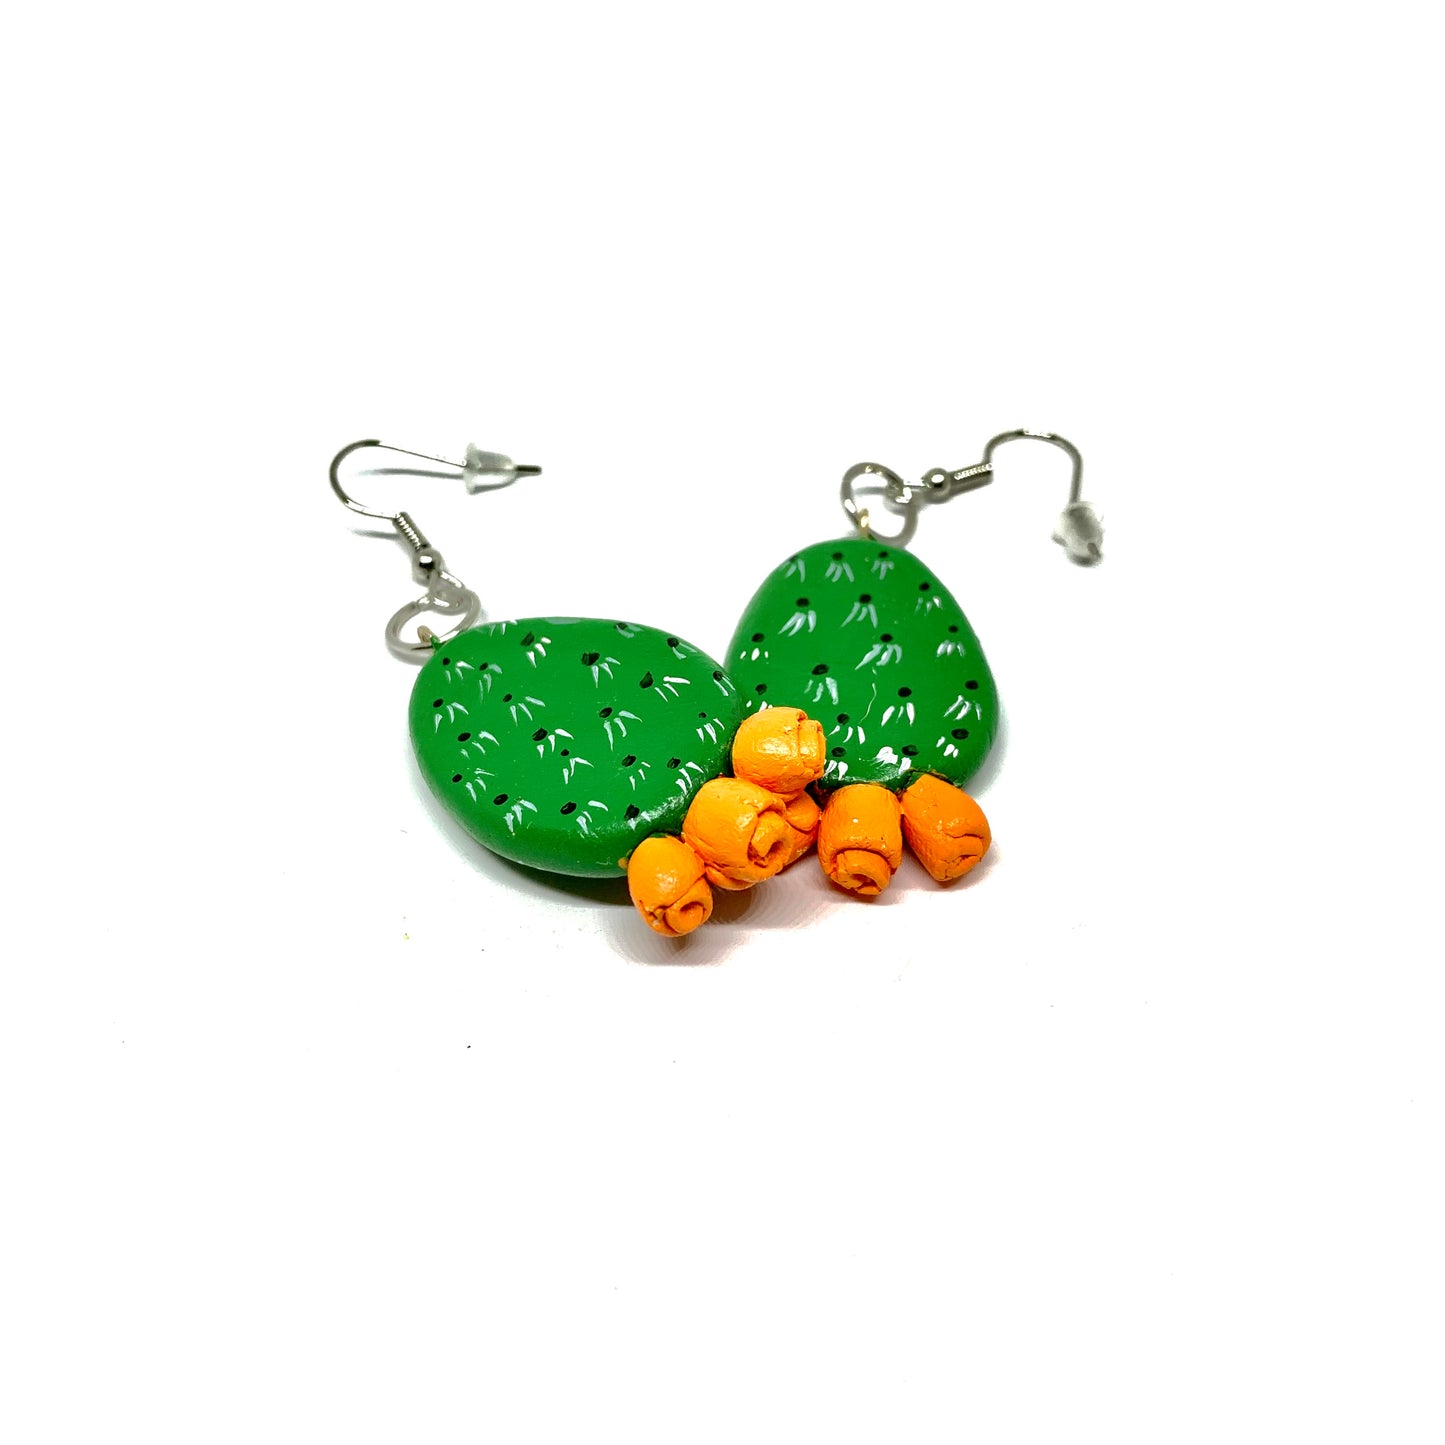 Cactus earrings. Handmade hand painted clay cactus earrings. Mexican jewelry by Fridamaniacs Frida Kahlo inspired Mexico Folk art. Wearable art accessories from Claywelry™